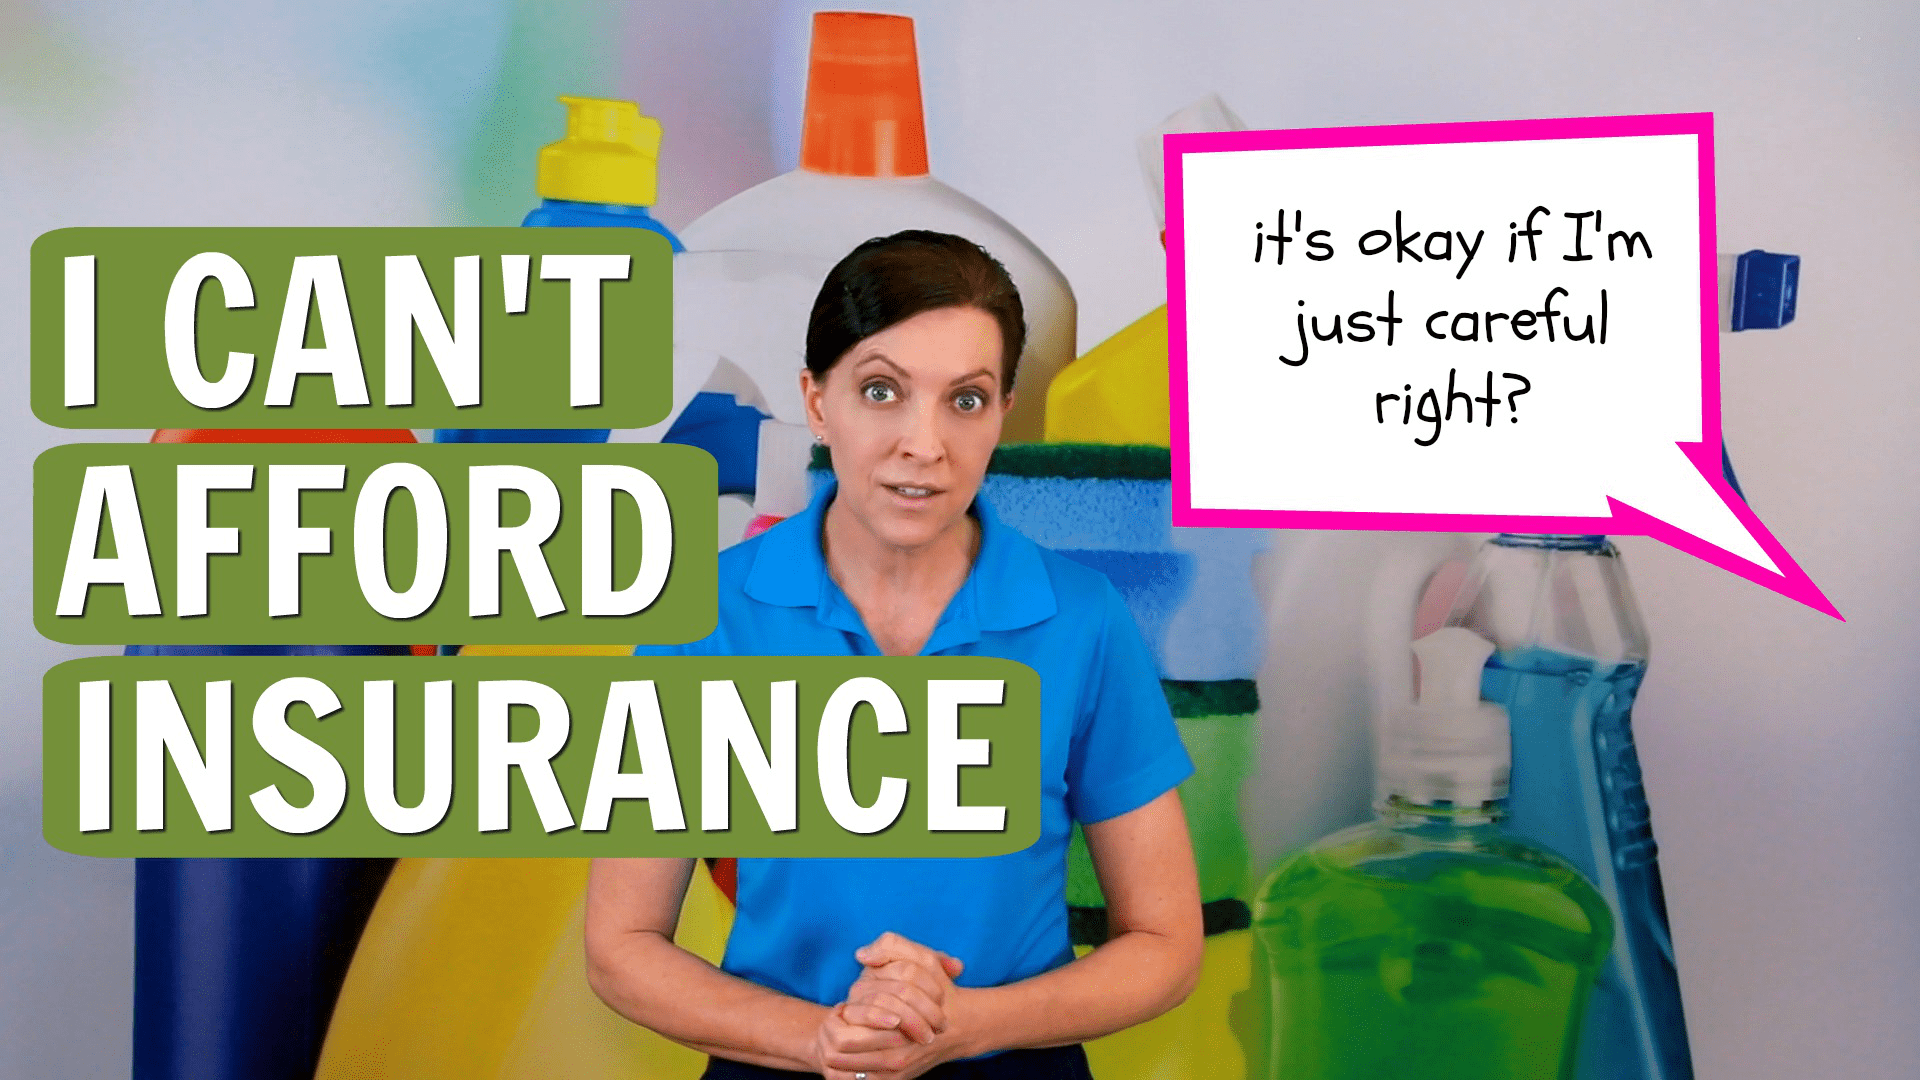 House Cleaner Can't Afford Insurance But It's Okay Right? Turnover Cleaning Tips